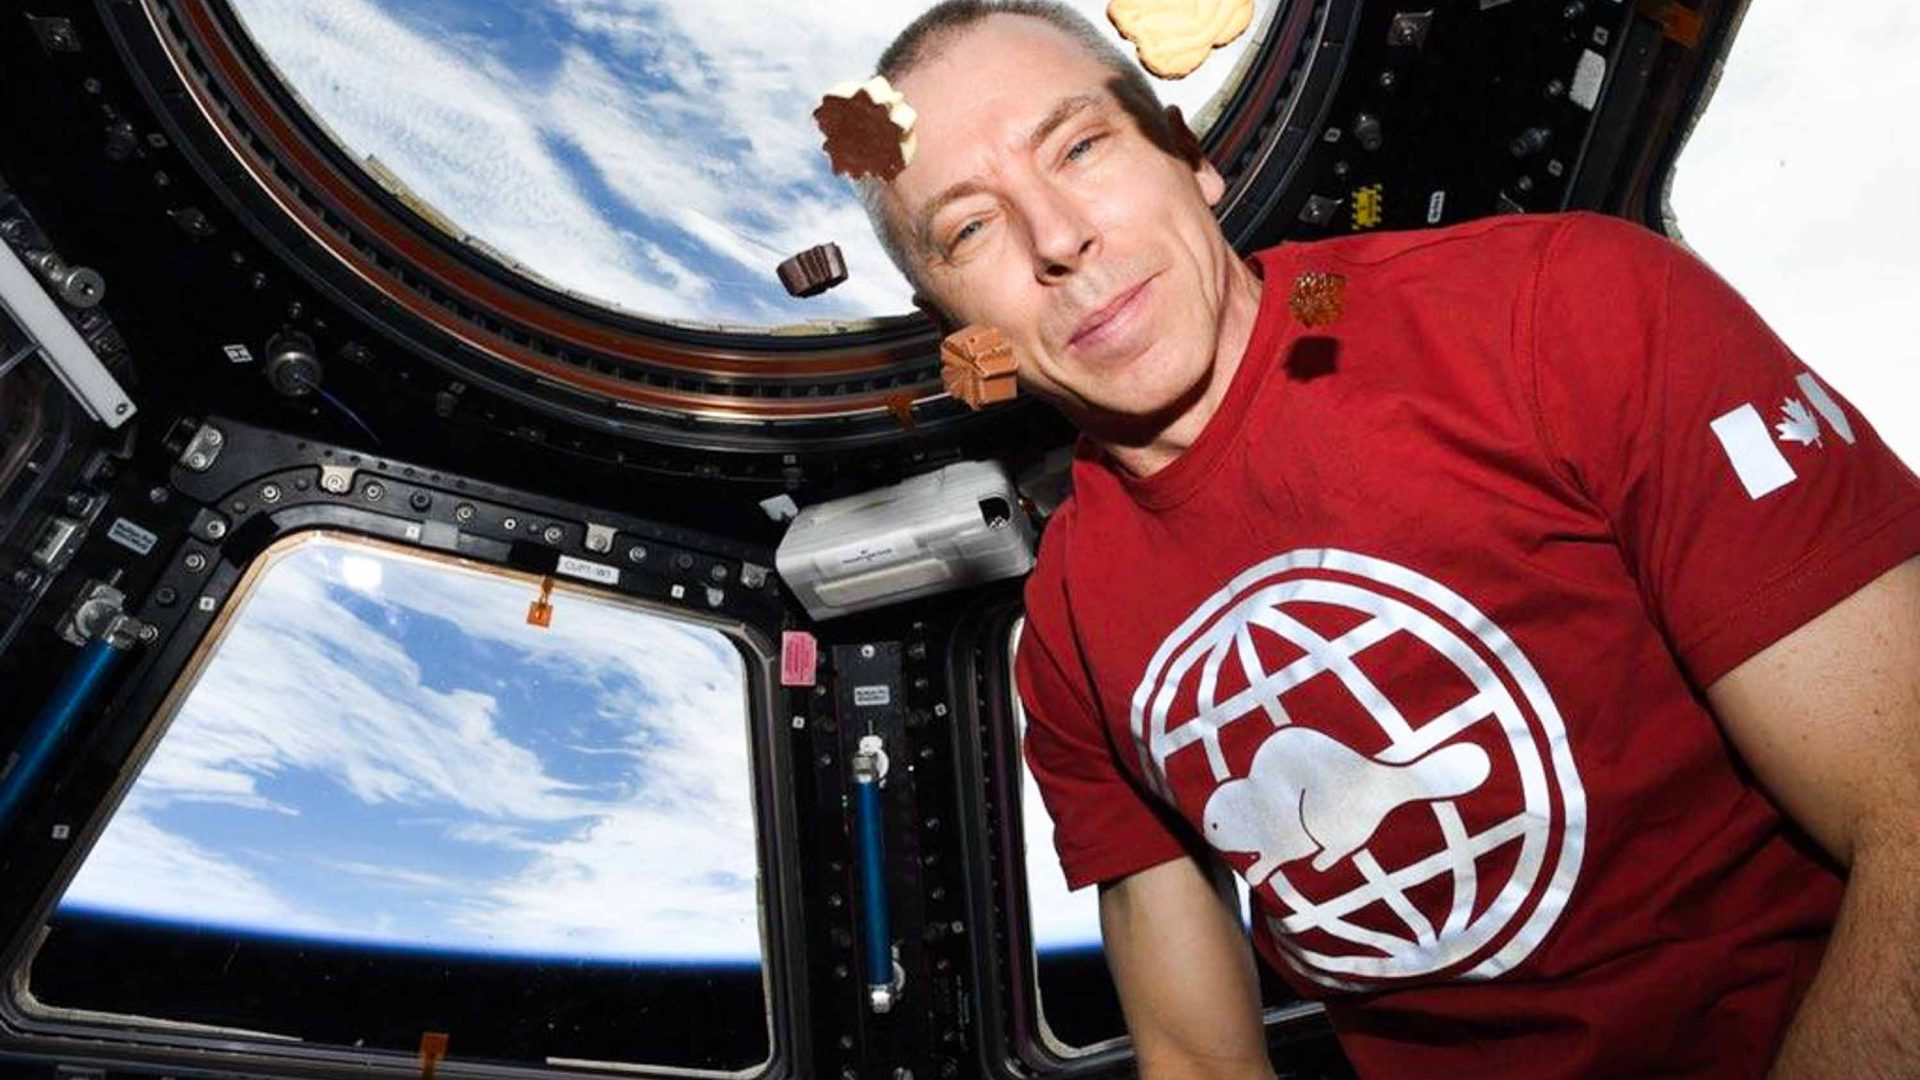 Chocolates floating round the face of someone on the International Space Station.